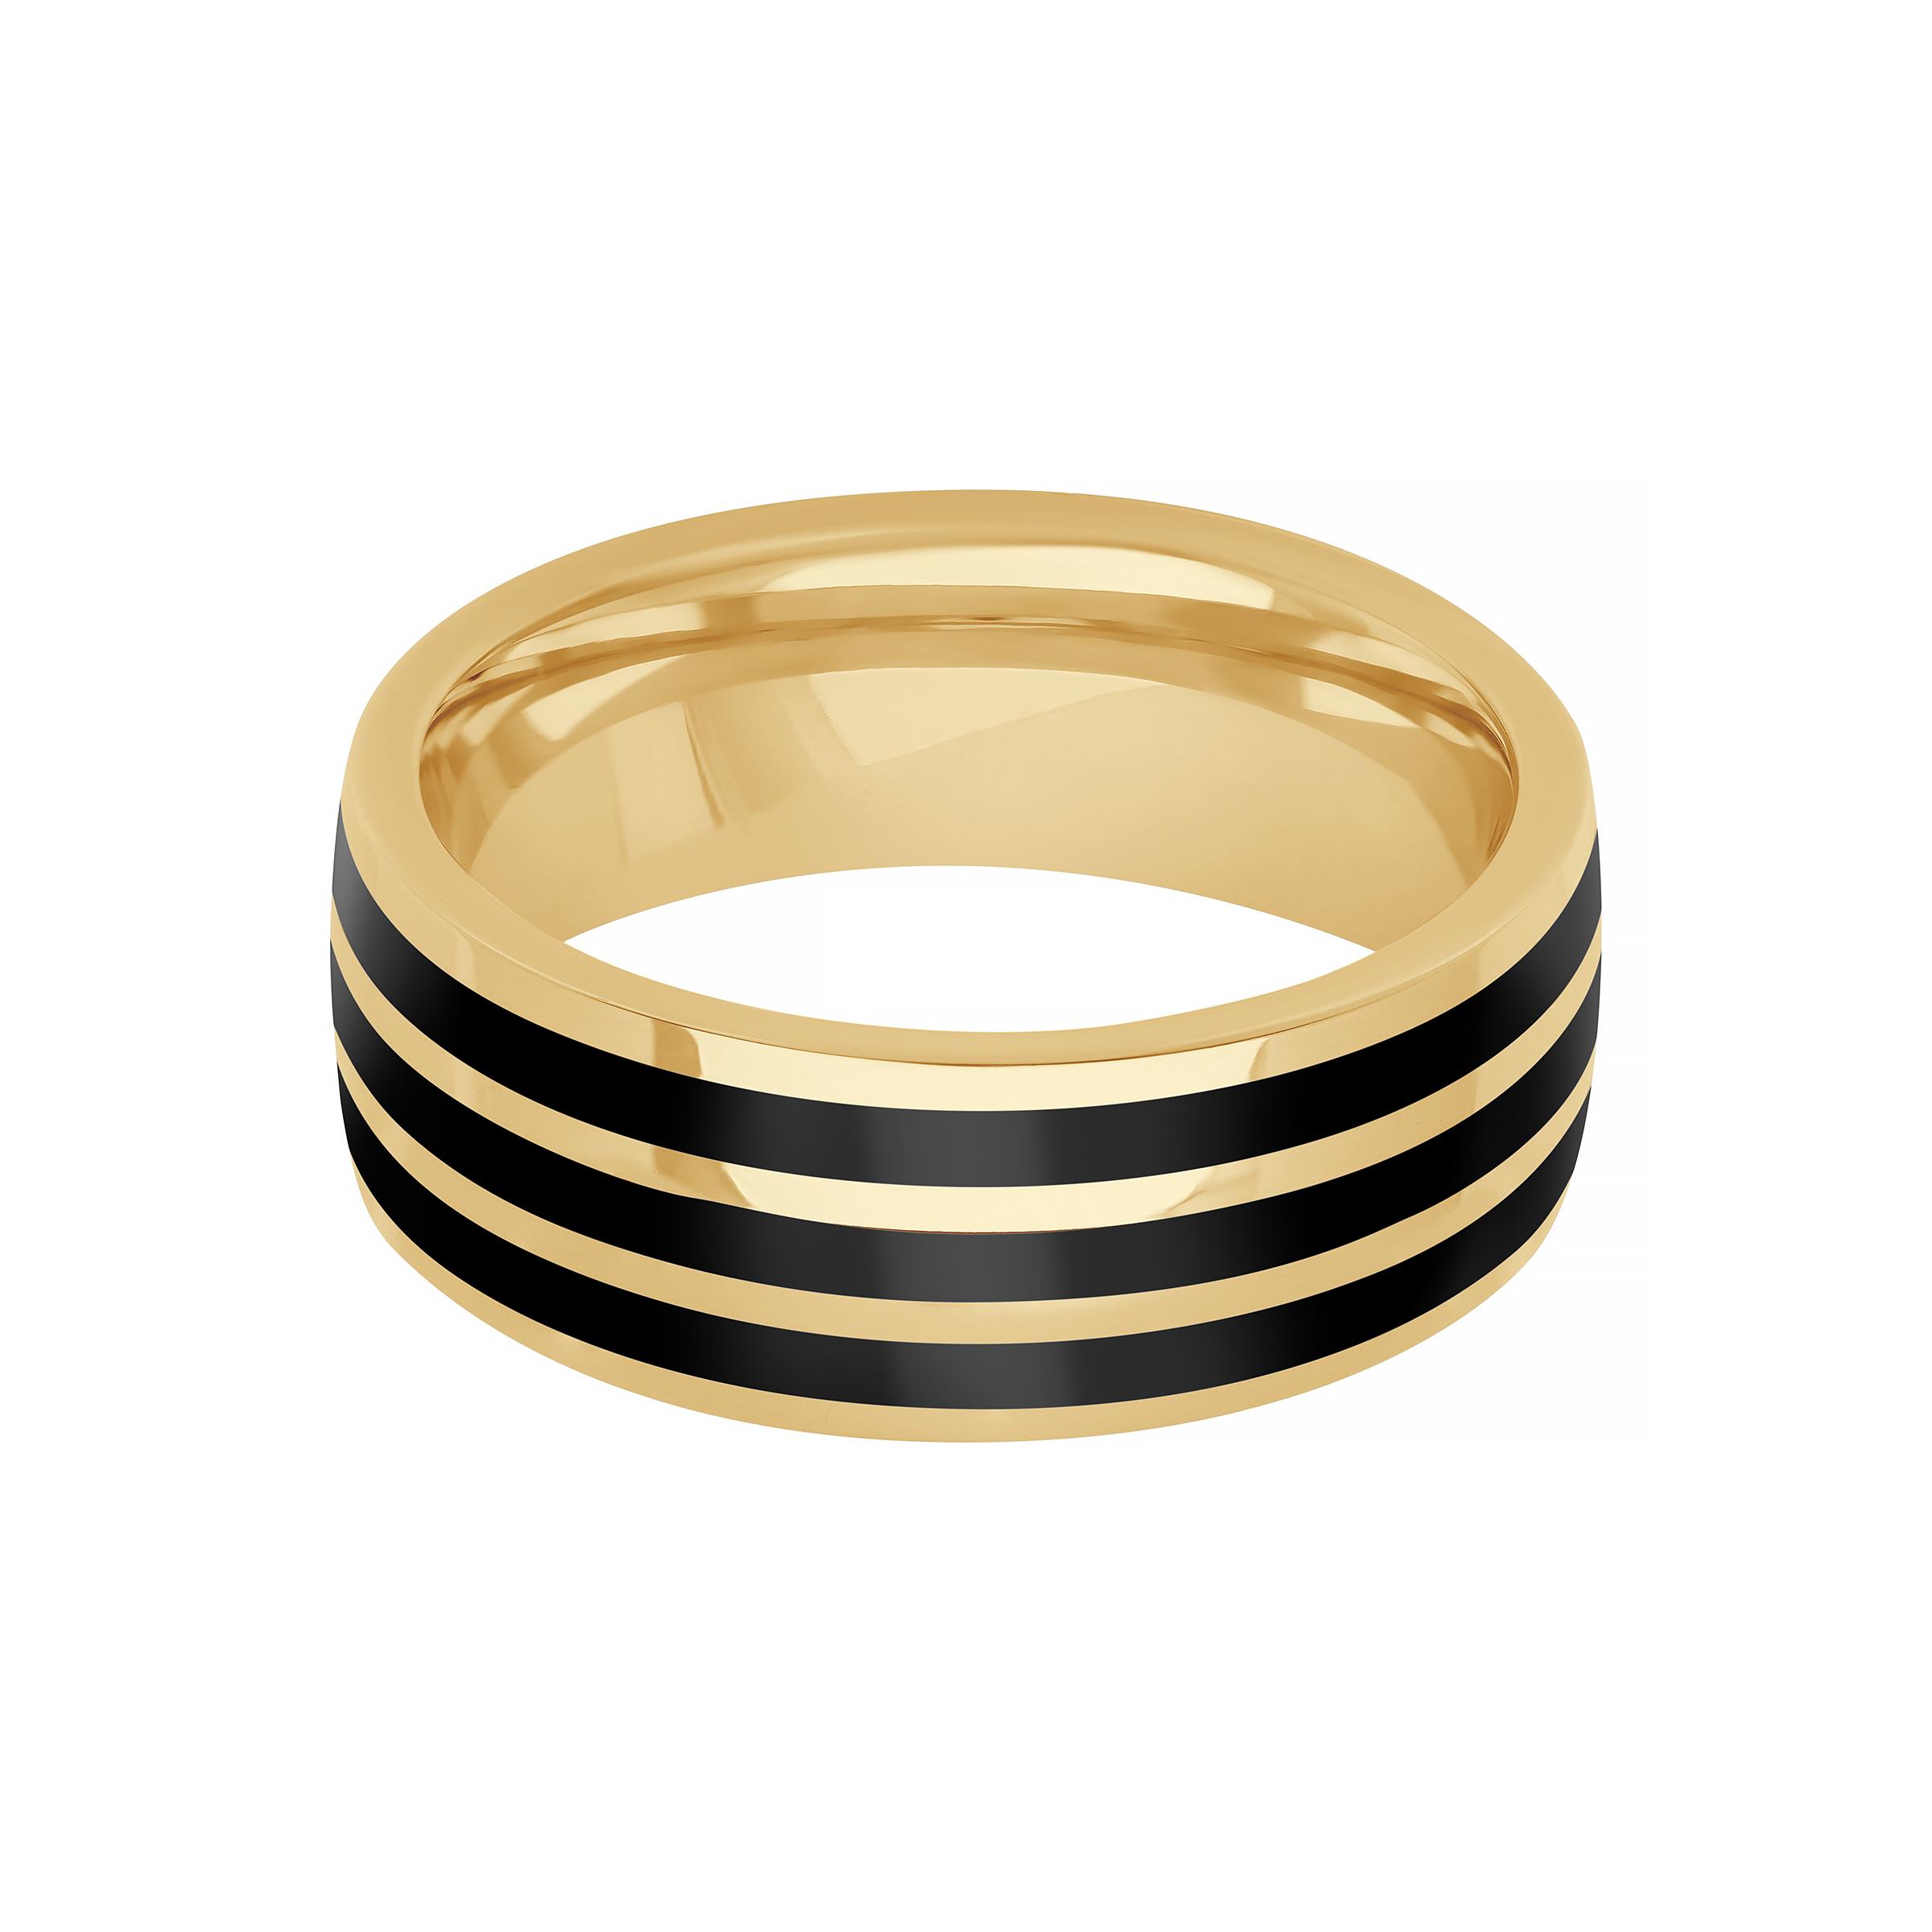 Gent's 14k Yellow Gold Band with Black Ceramic Stripes